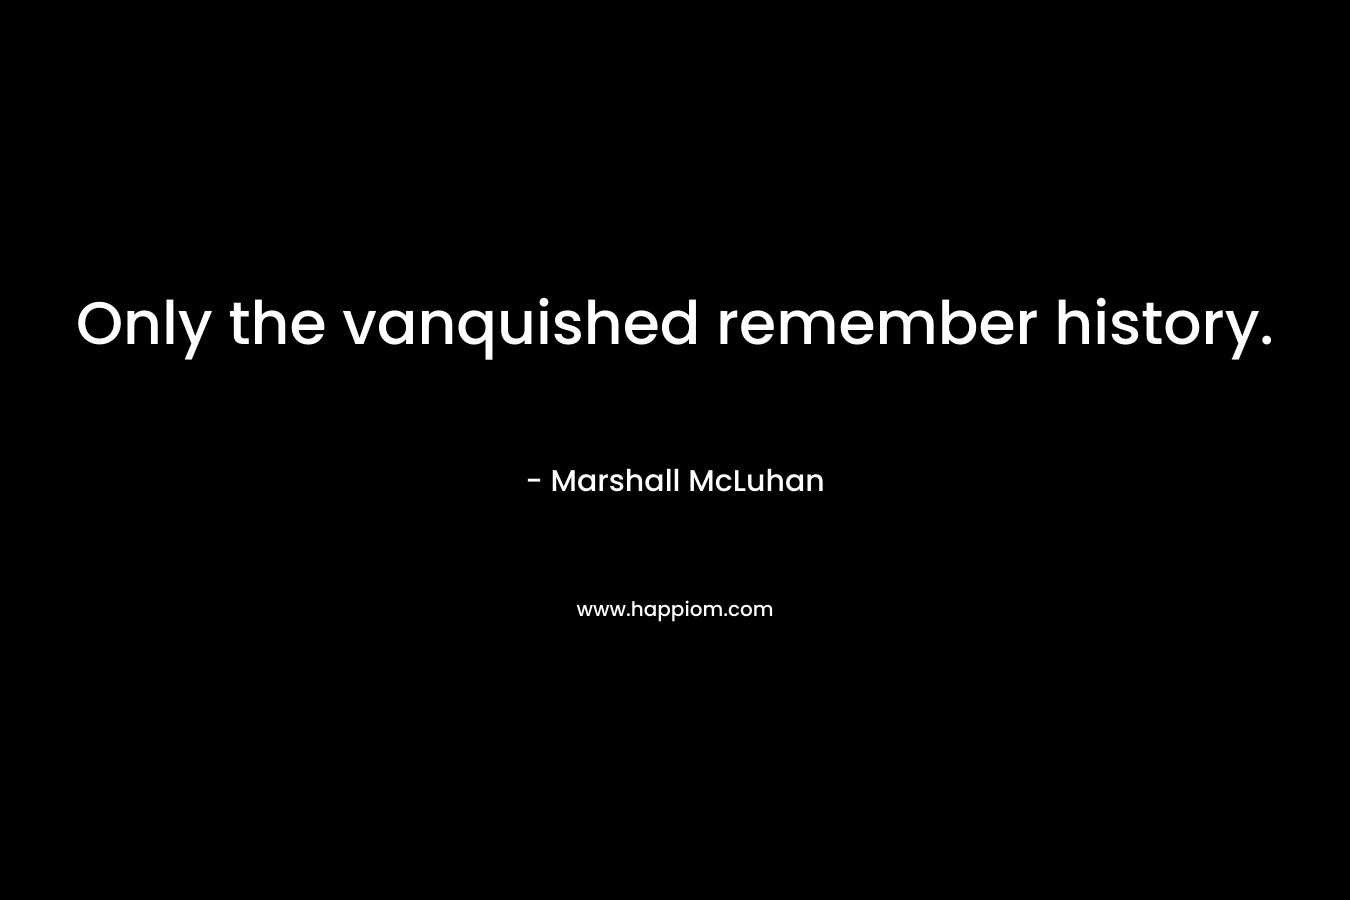 Only the vanquished remember history. – Marshall McLuhan